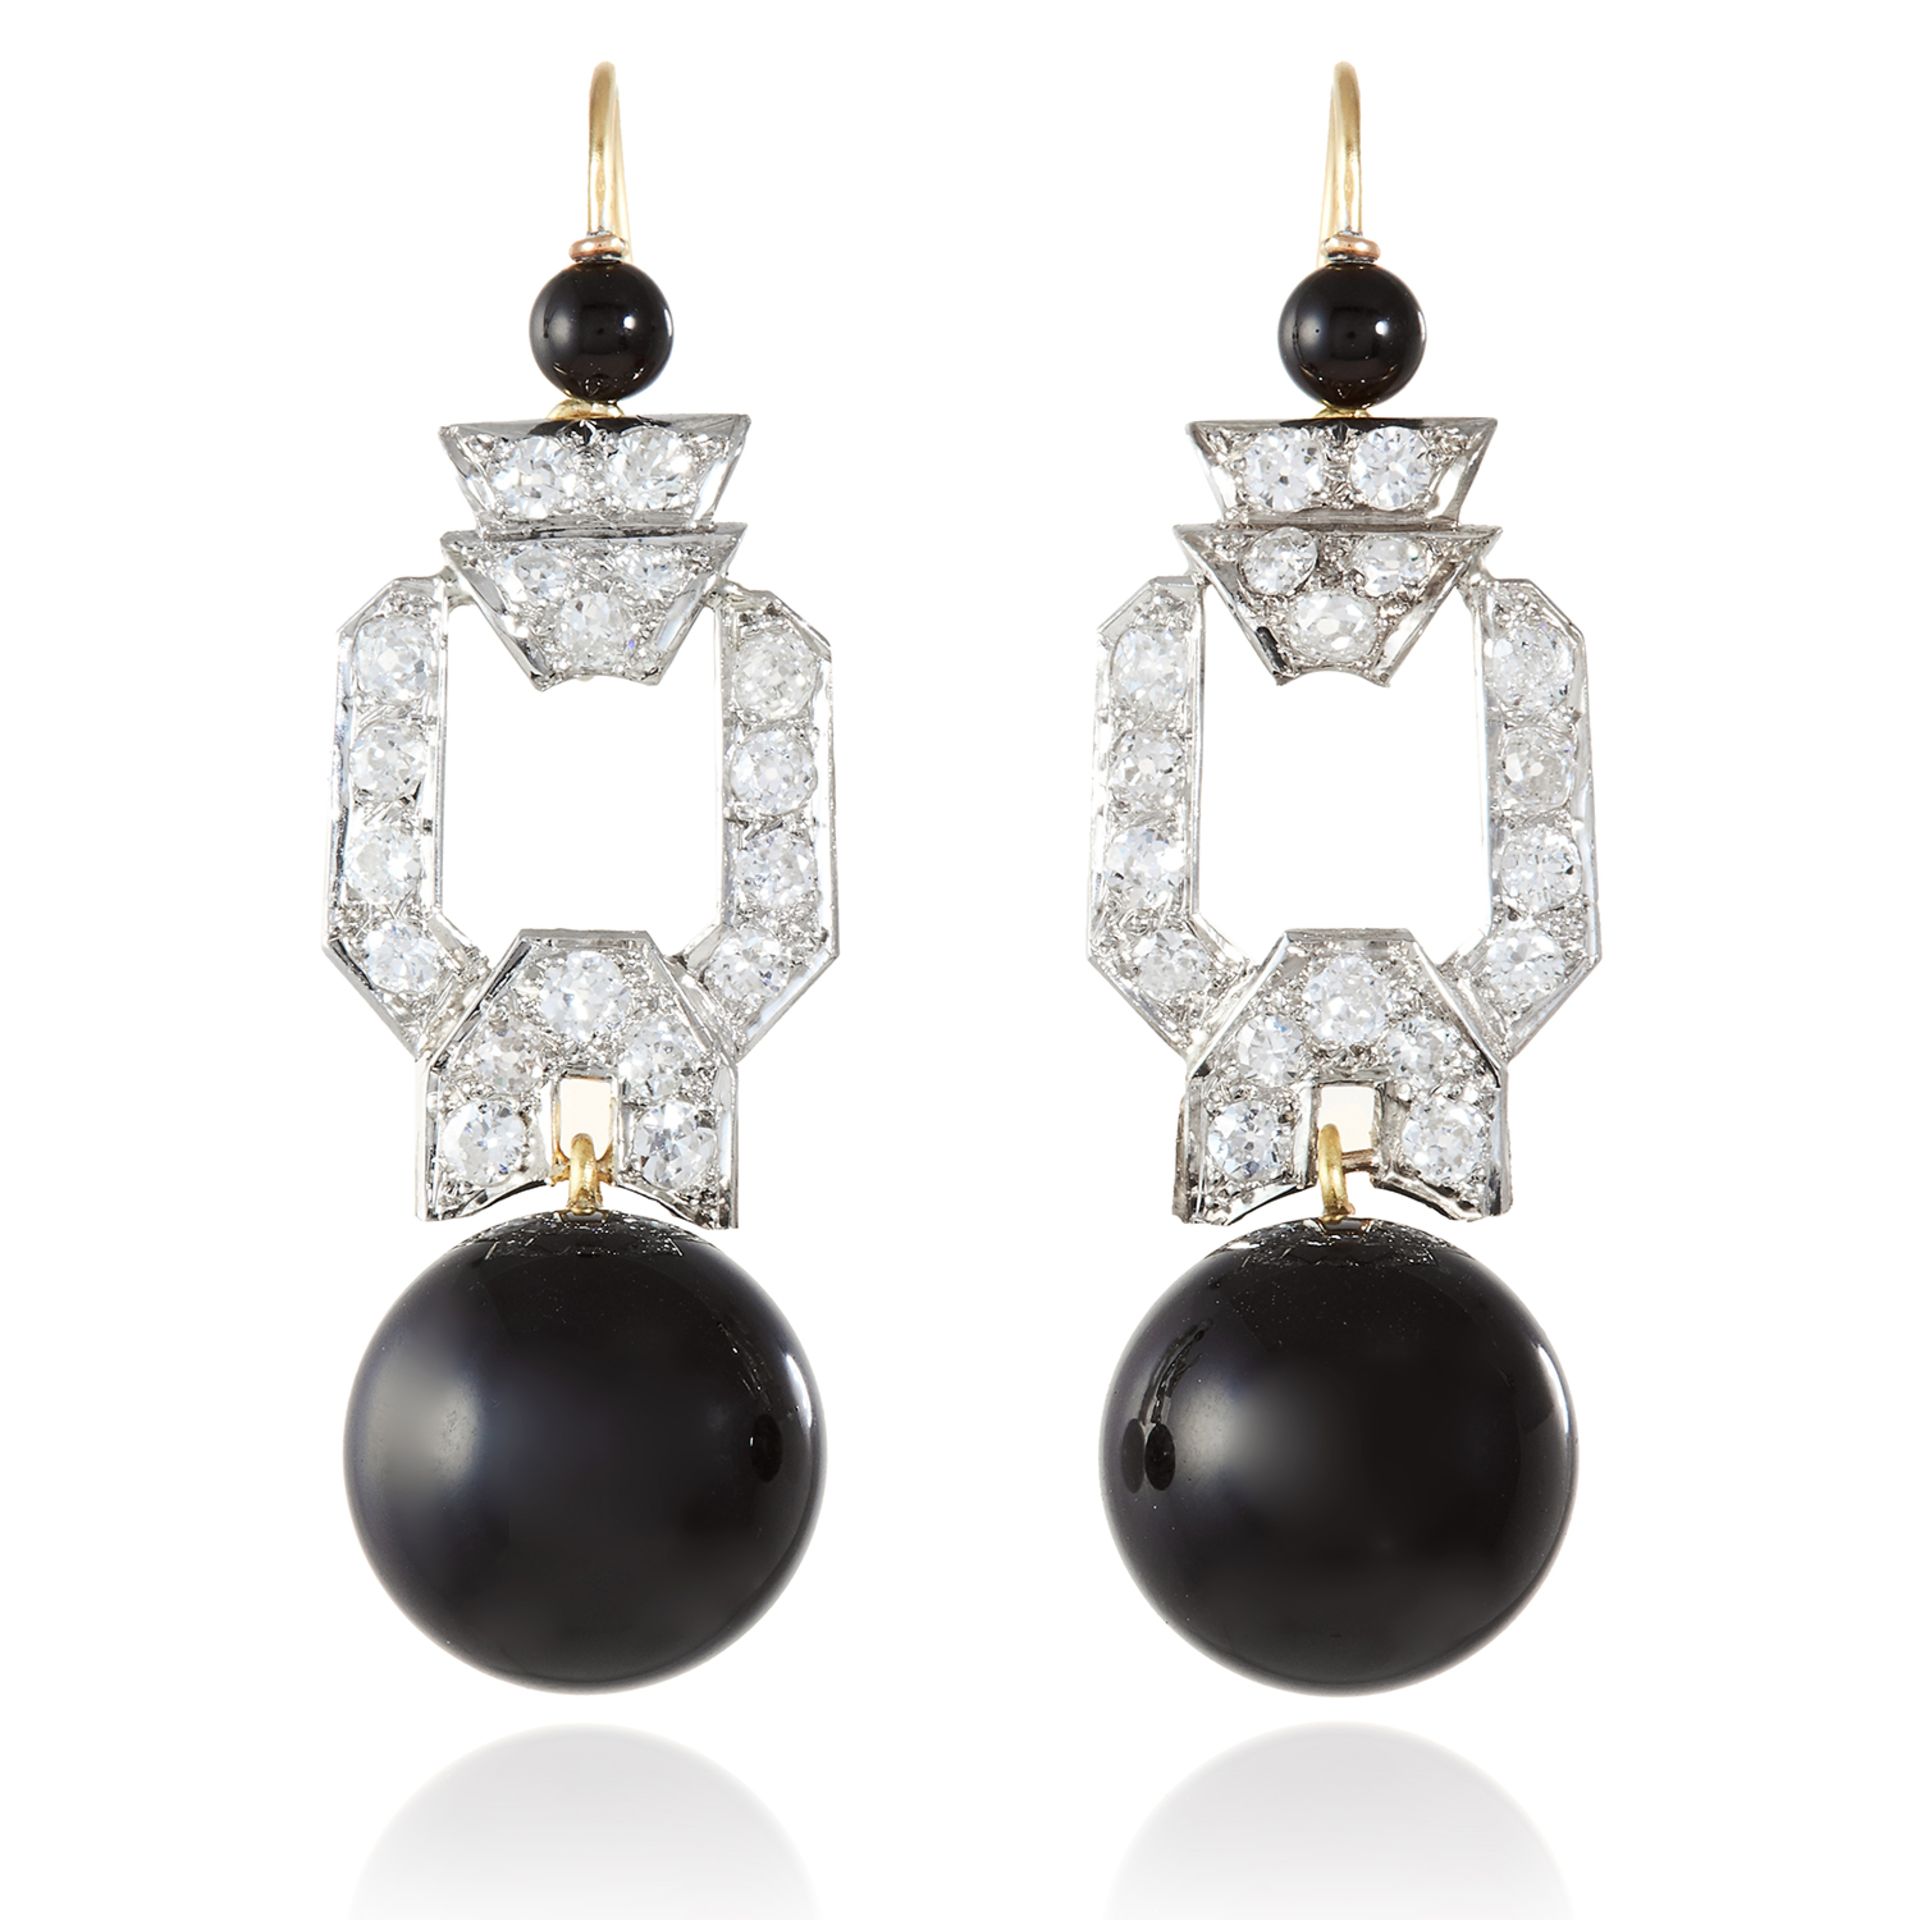 A PAIR OF ART DECO BLACK ONYX AND DIAMOND EARRINGS in platinum and yellow gold, each suspending a